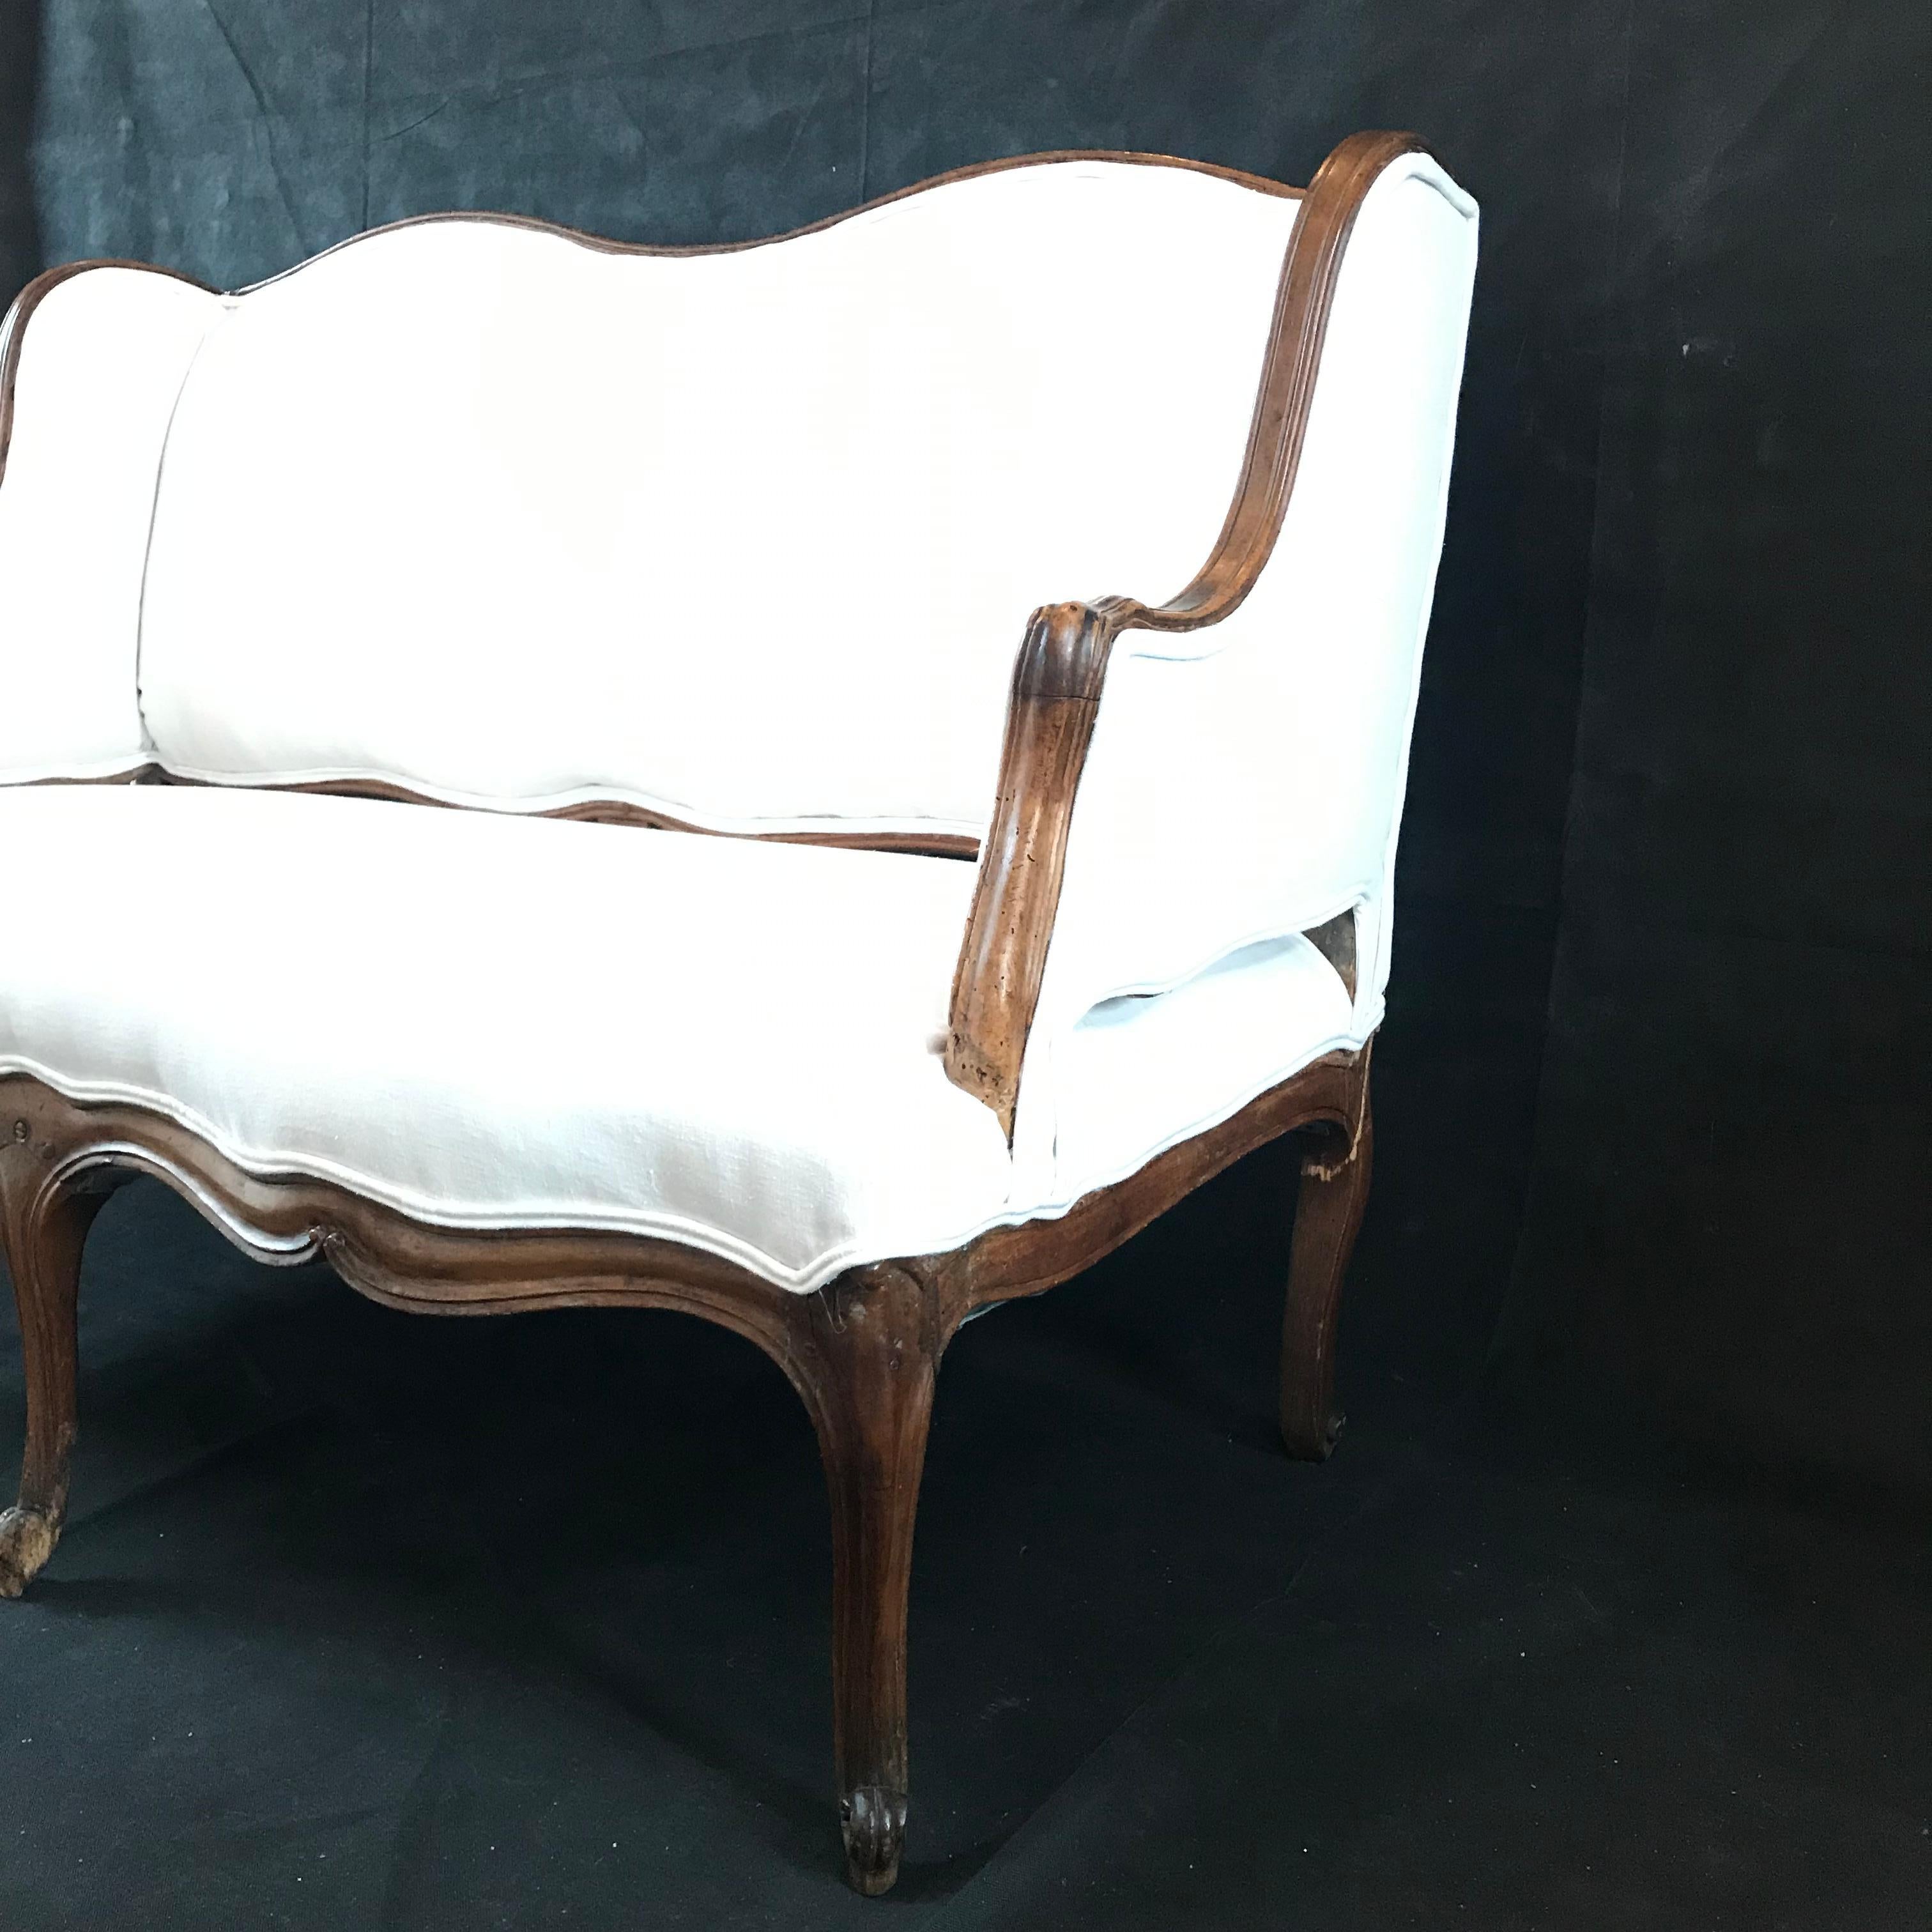 Hand carved walnut loveseat with a sophisticated sleek shape and new white upholstery. Seat height 17.5.